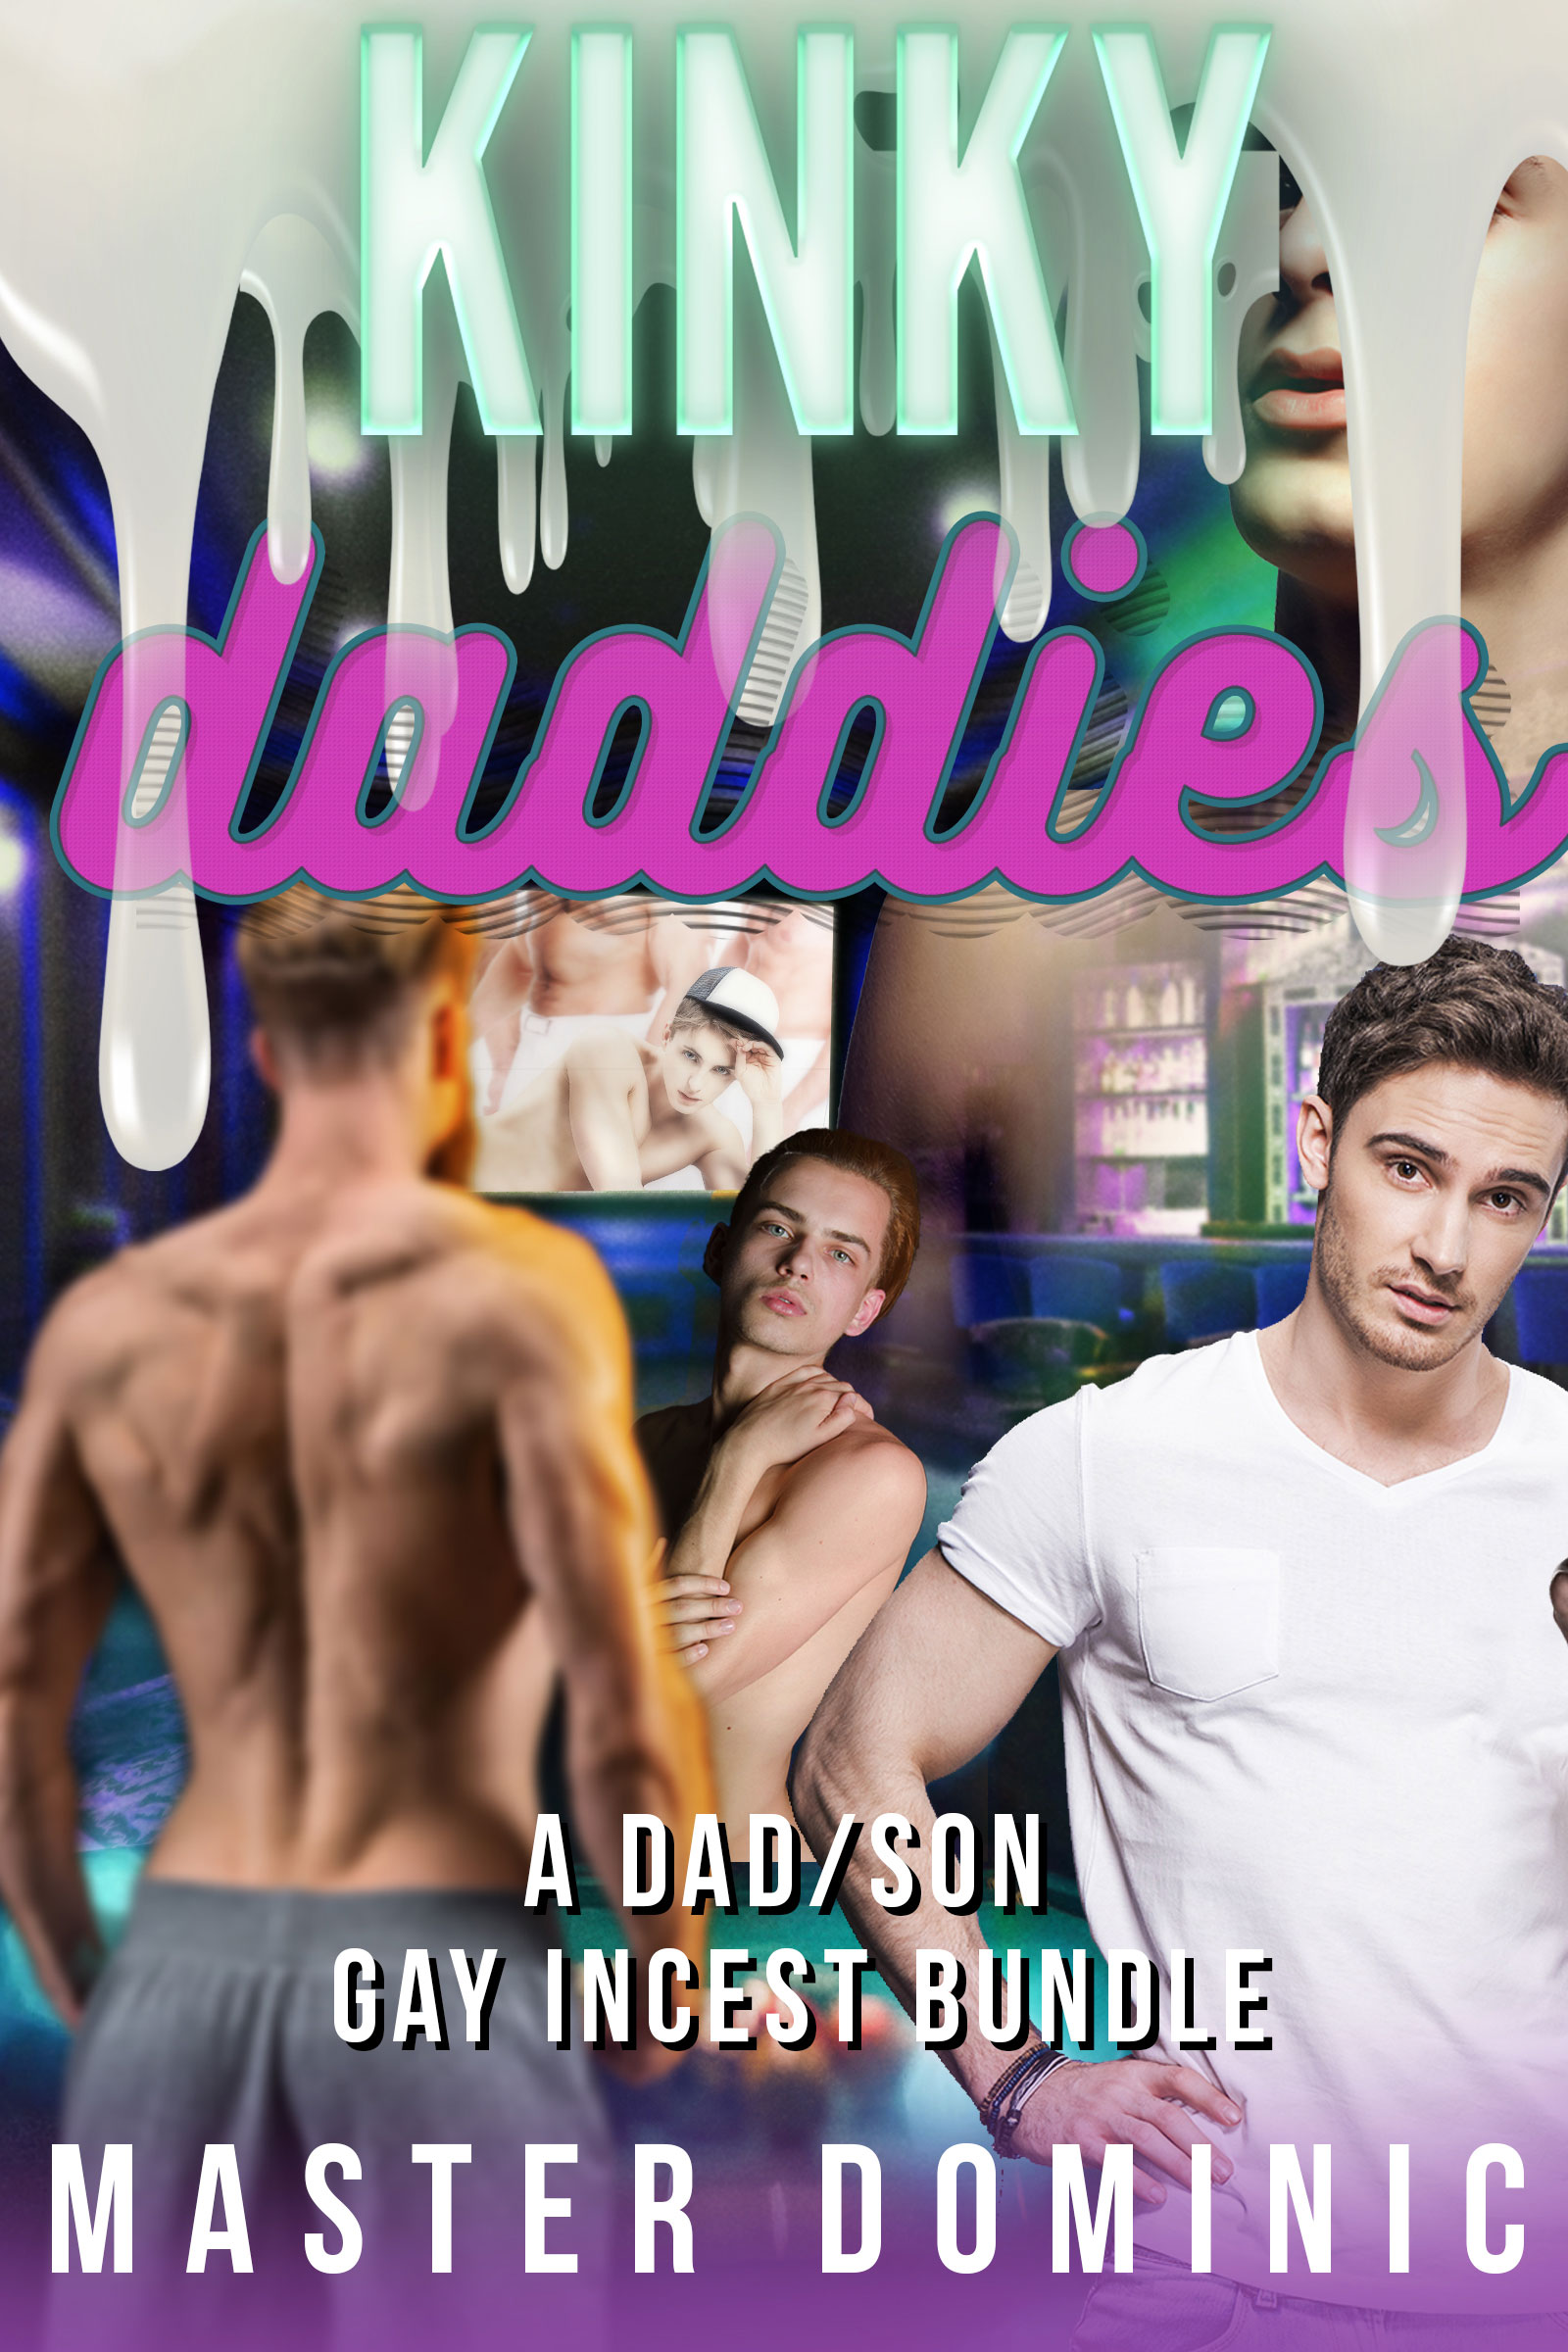 Kinky Daddies A Dad/Son Gay Incest 4-Pack Bundle Dirty Gay Erotica from Master Dominic